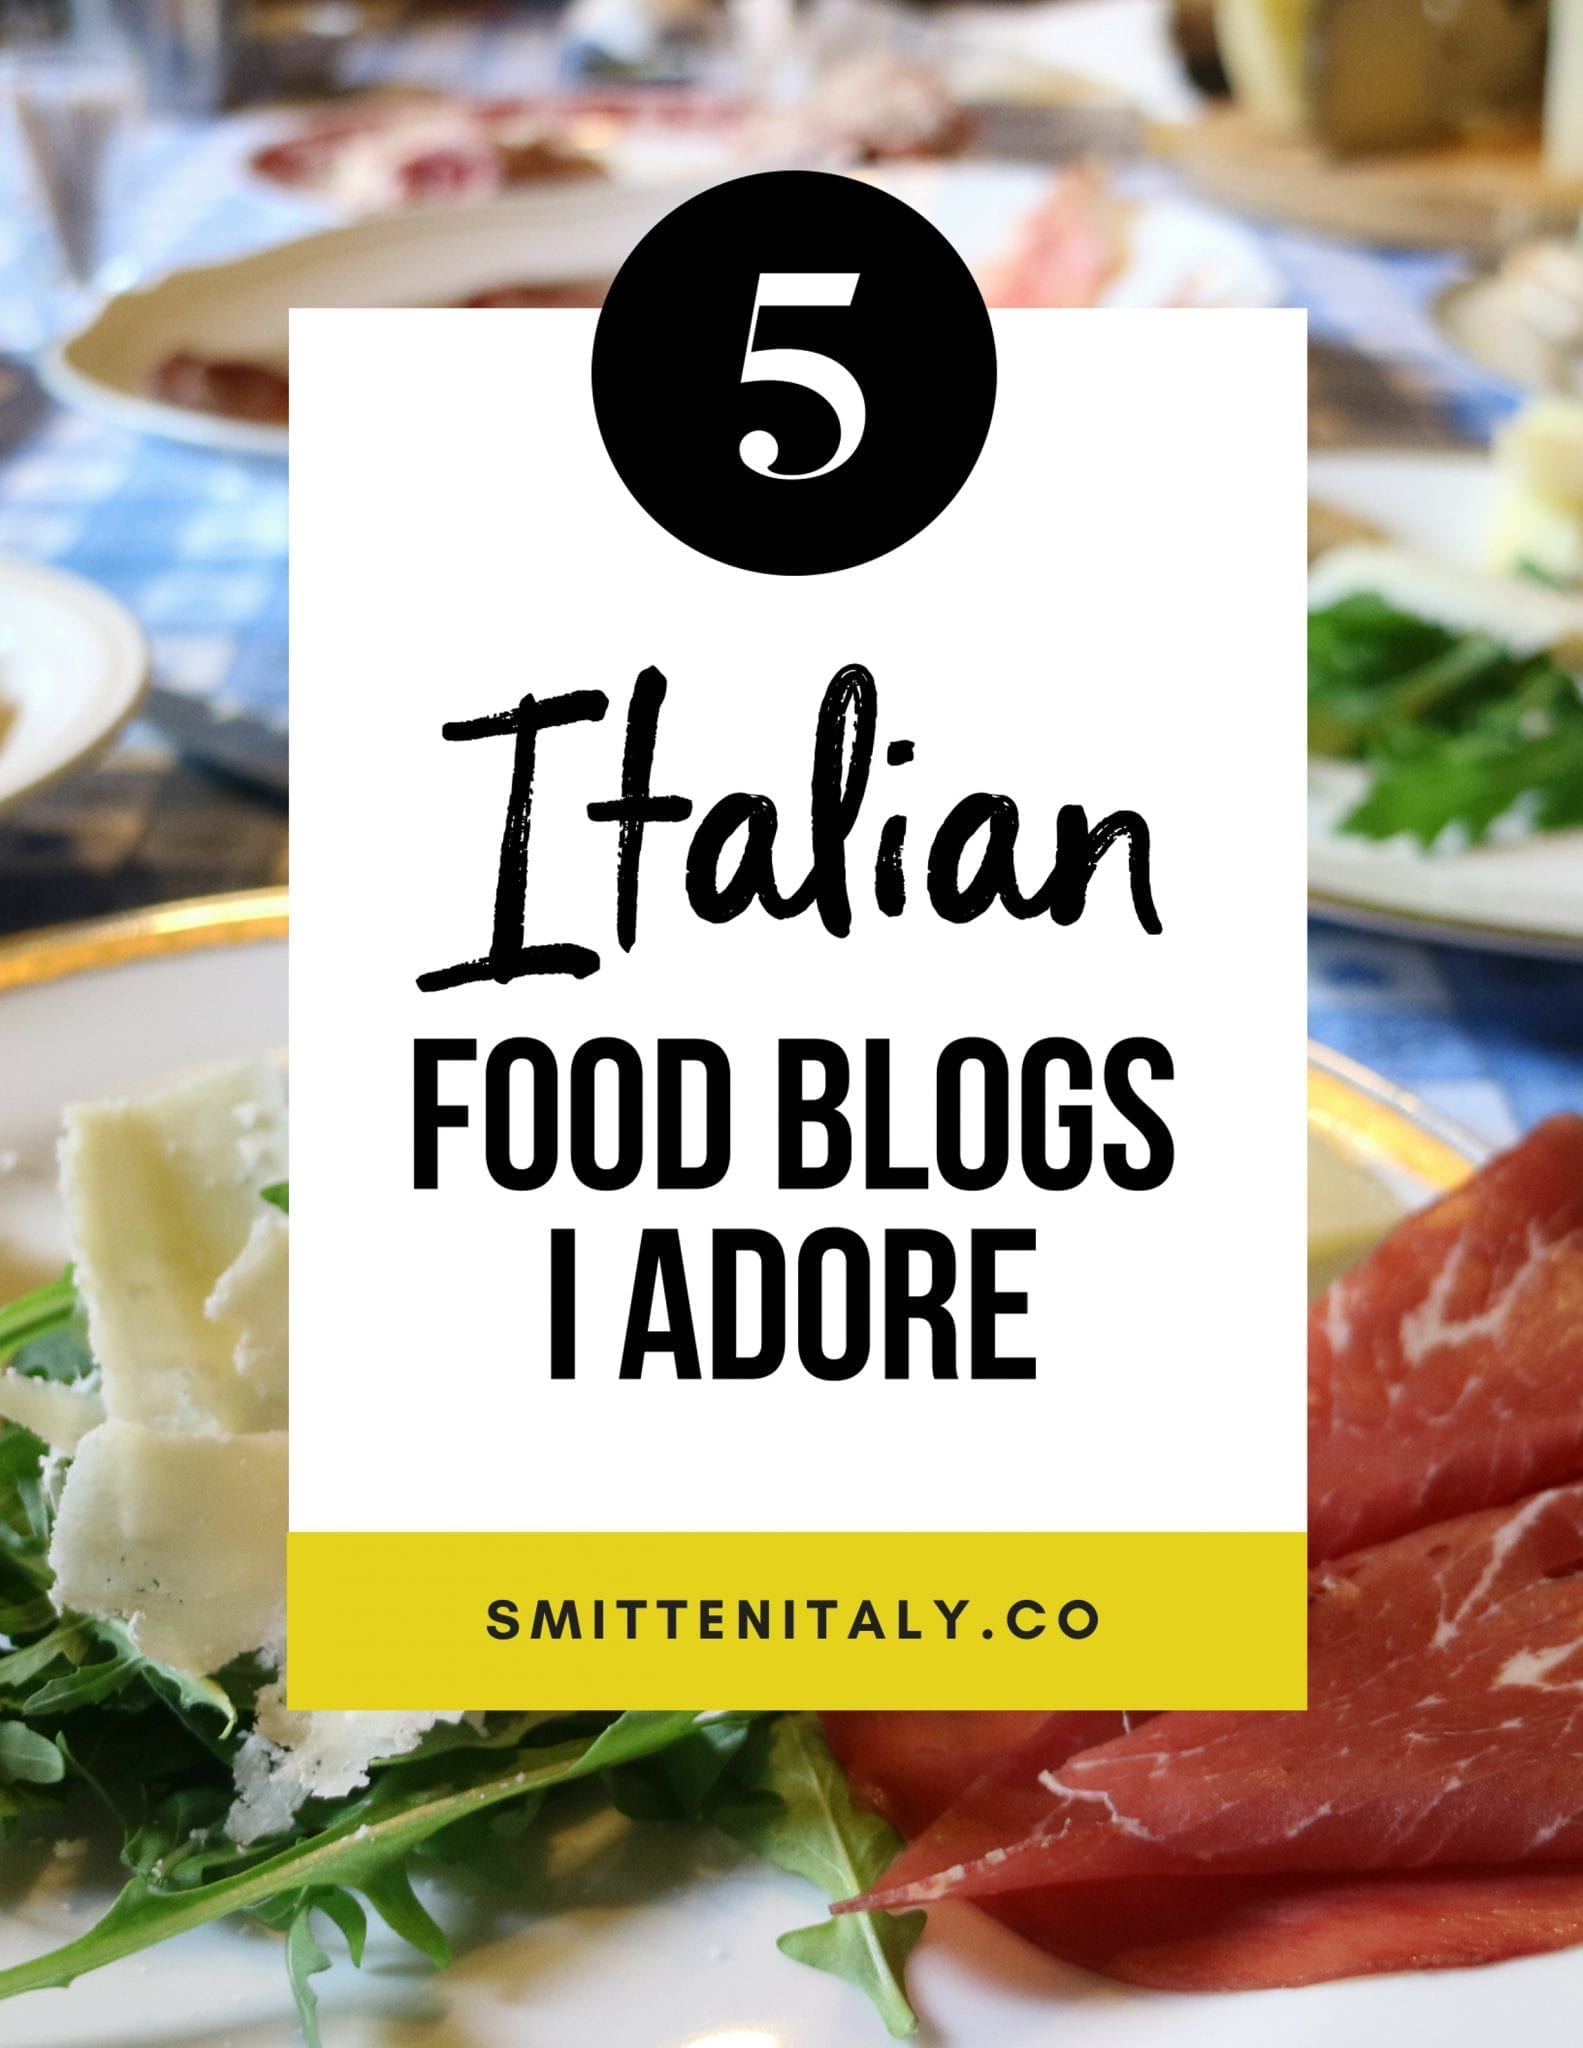 5 Italian Food Blogs to read now